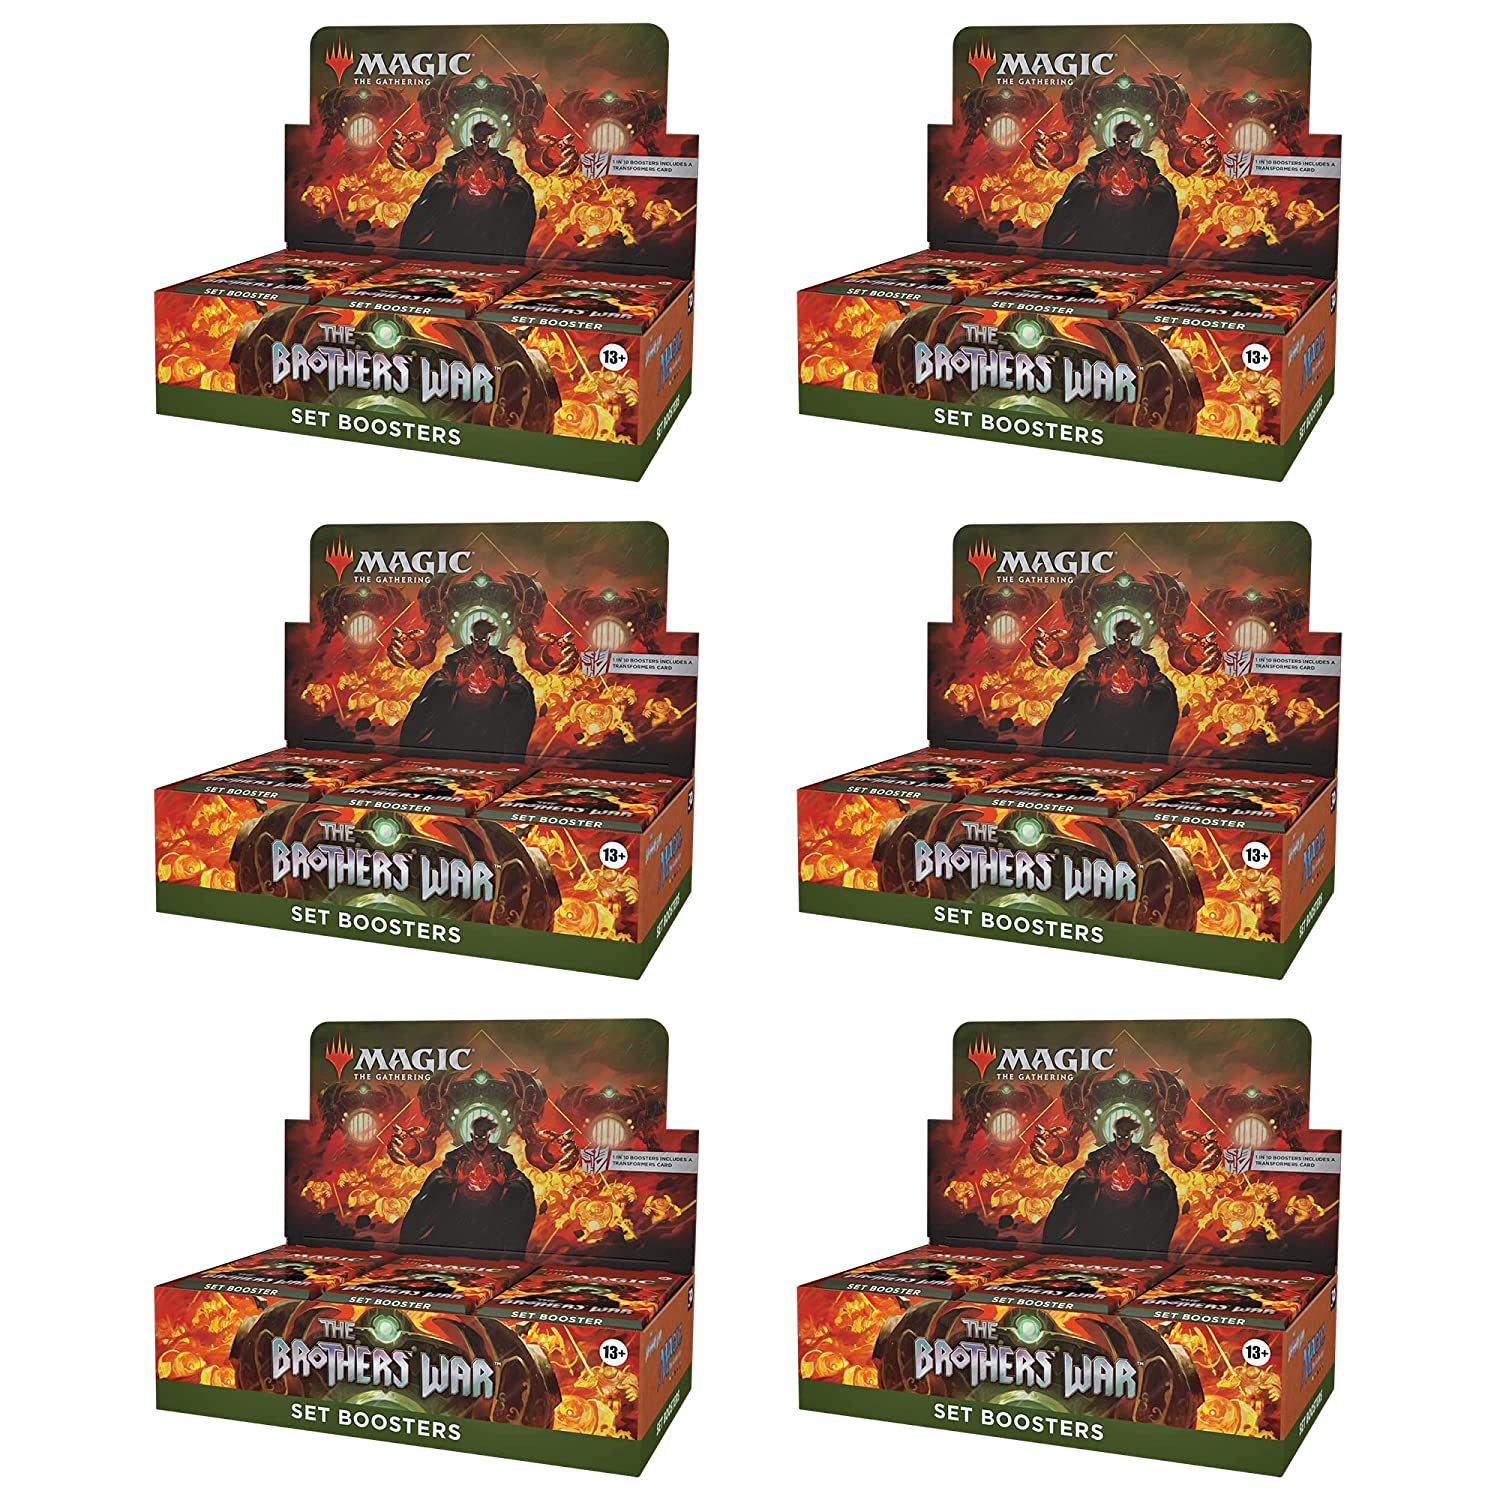 Magic: The Gathering The Brothers War Case of 6 Set Booster Boxes - $1,124.99